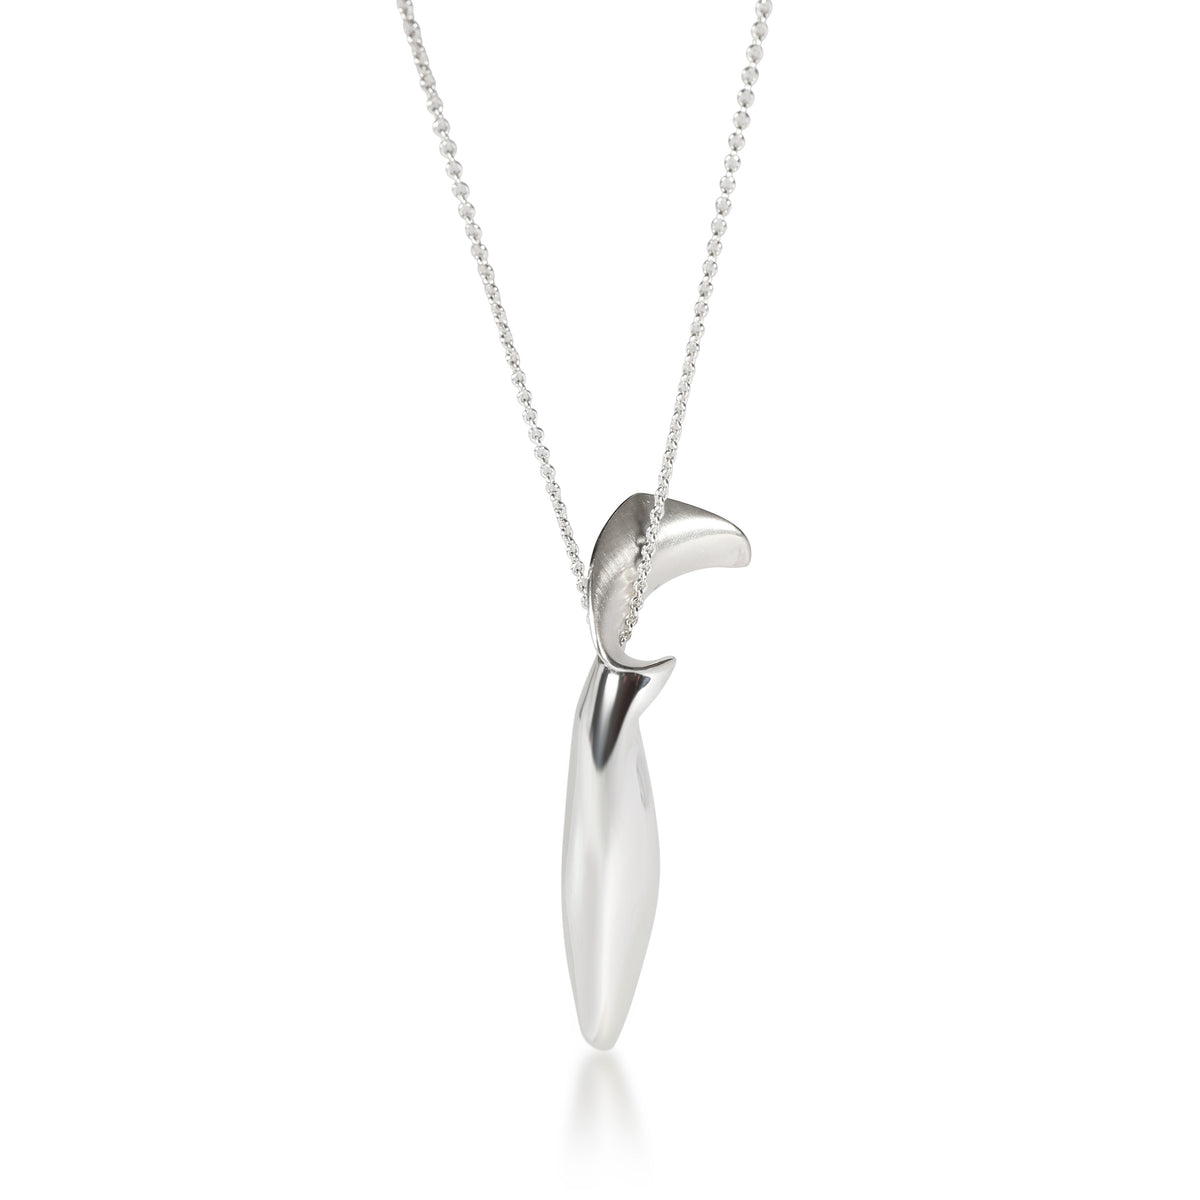 Tiffany & Co. Frank Gehry Orchid Necklace in  Sterling Silver